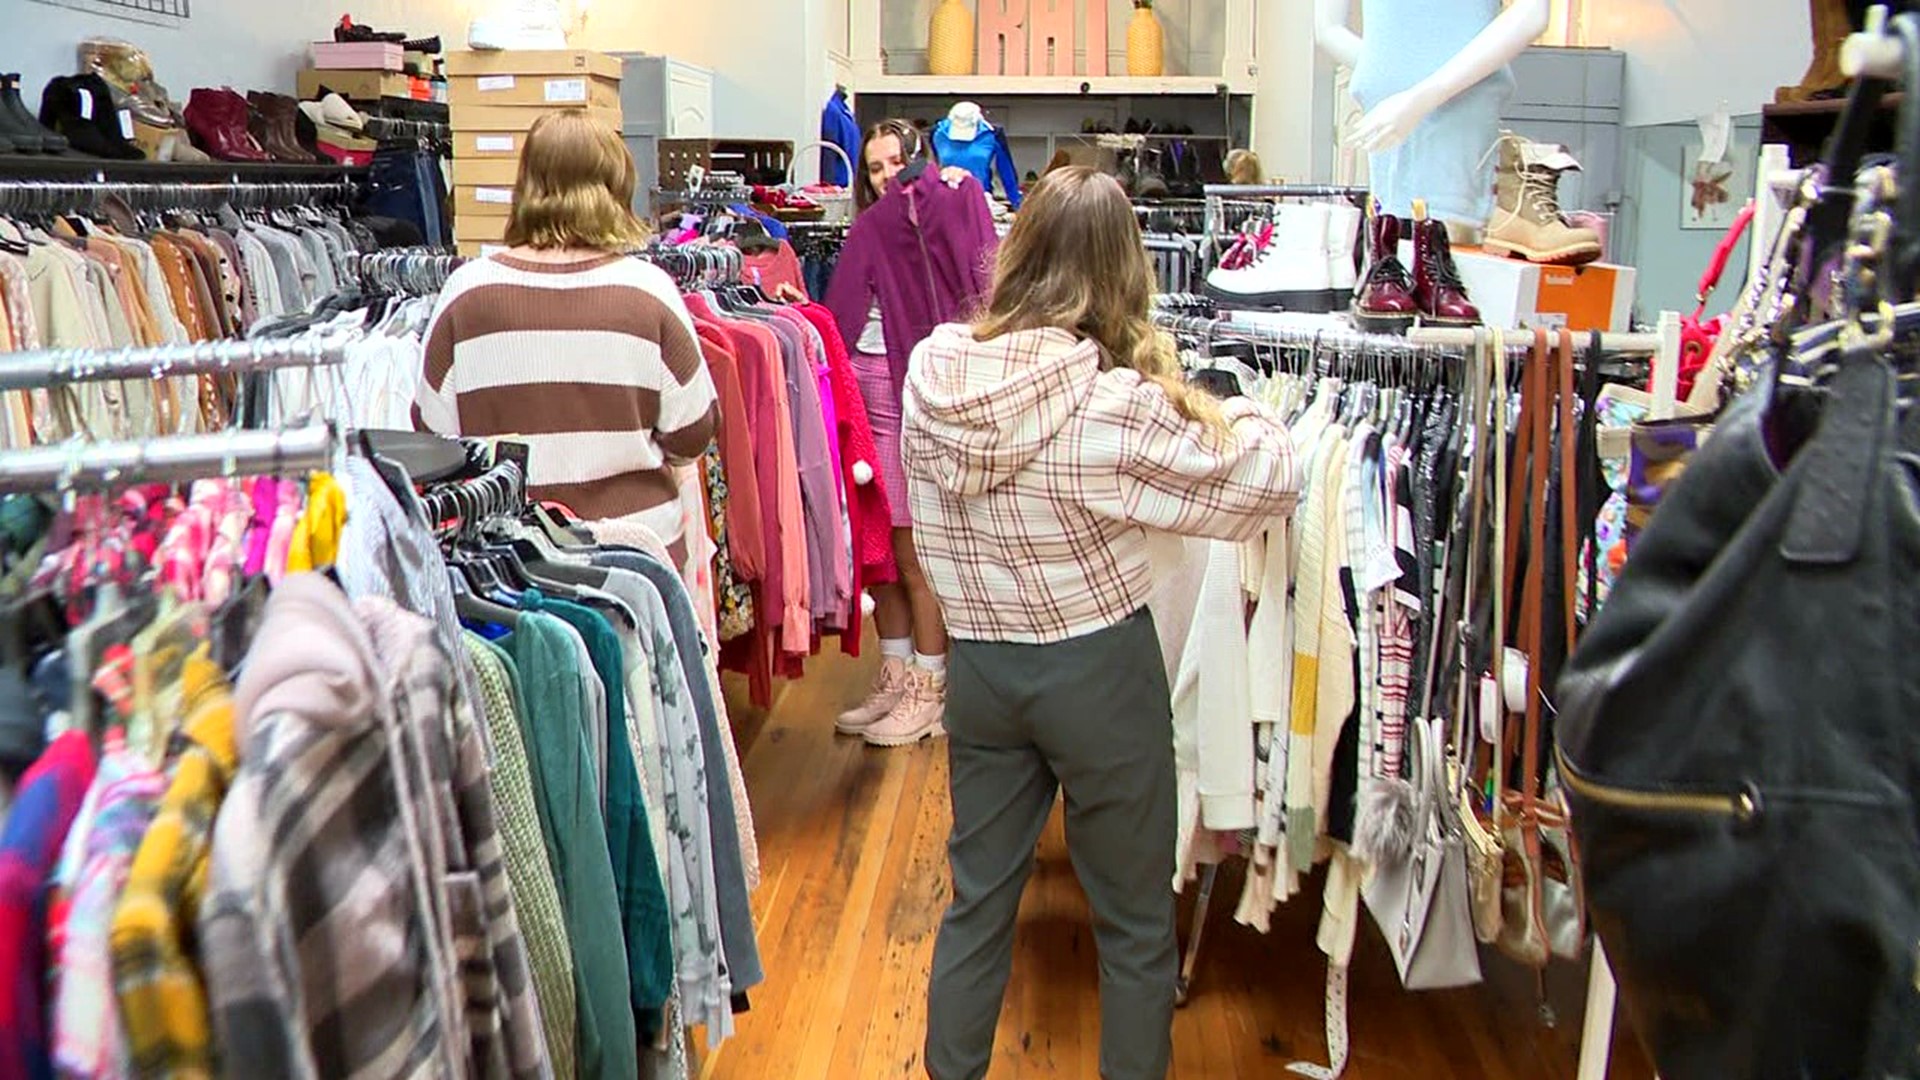 Newswatch 16's Claire Alfree takes us to one thrift store that's showing teens how to be frugal and fashionable.